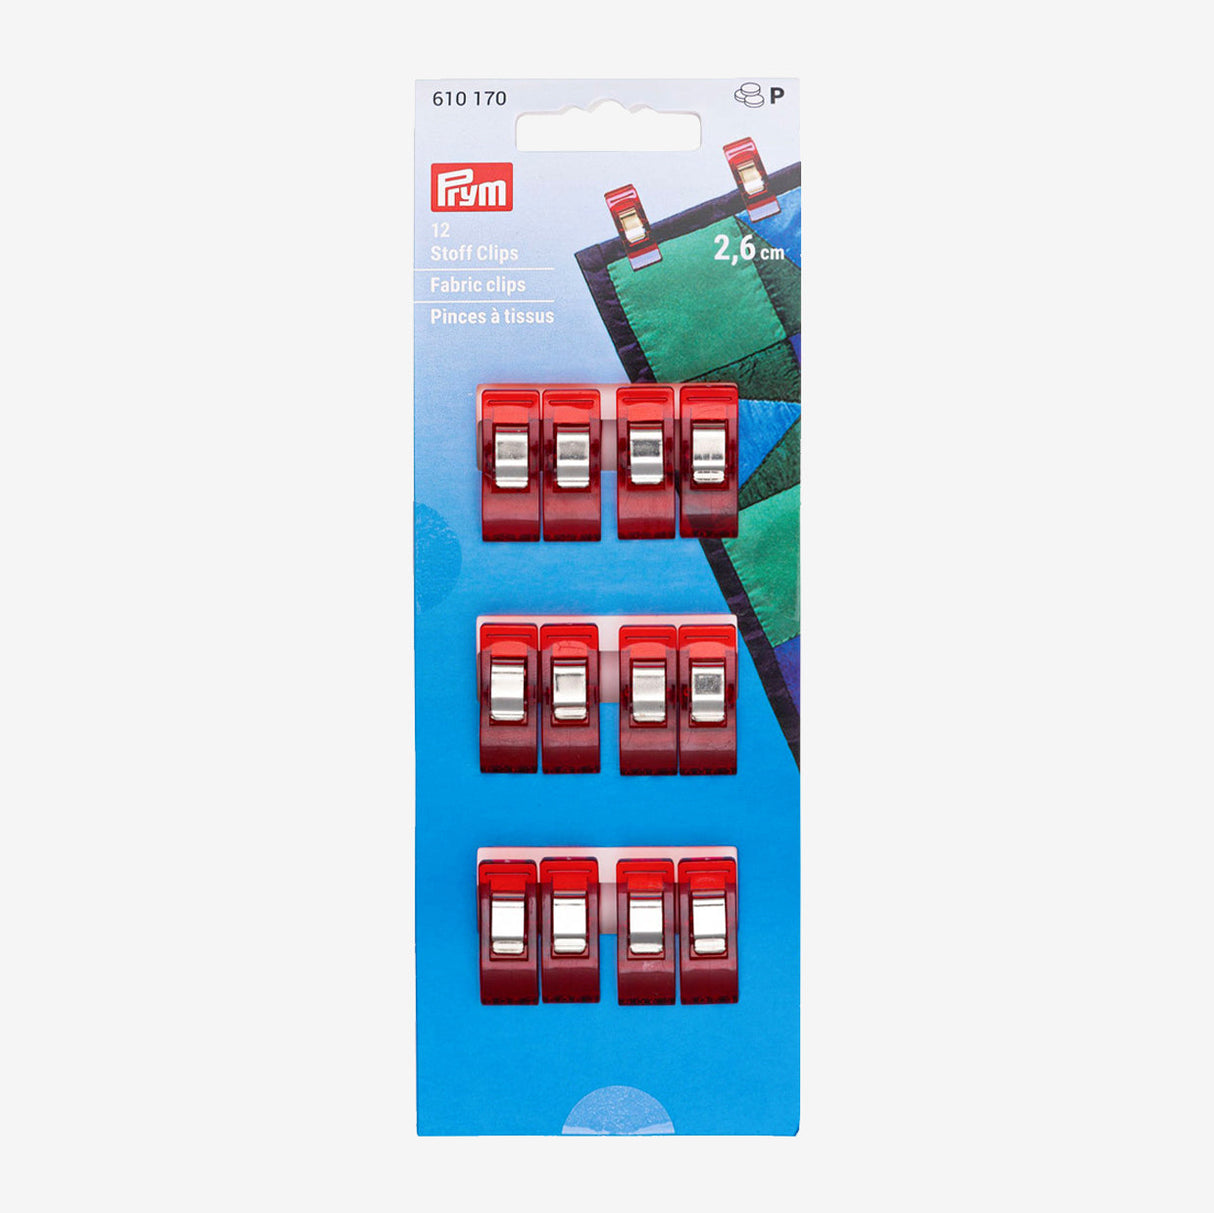 Prym Love 610170 Fabric Clips: Protect your Fabrics with Style